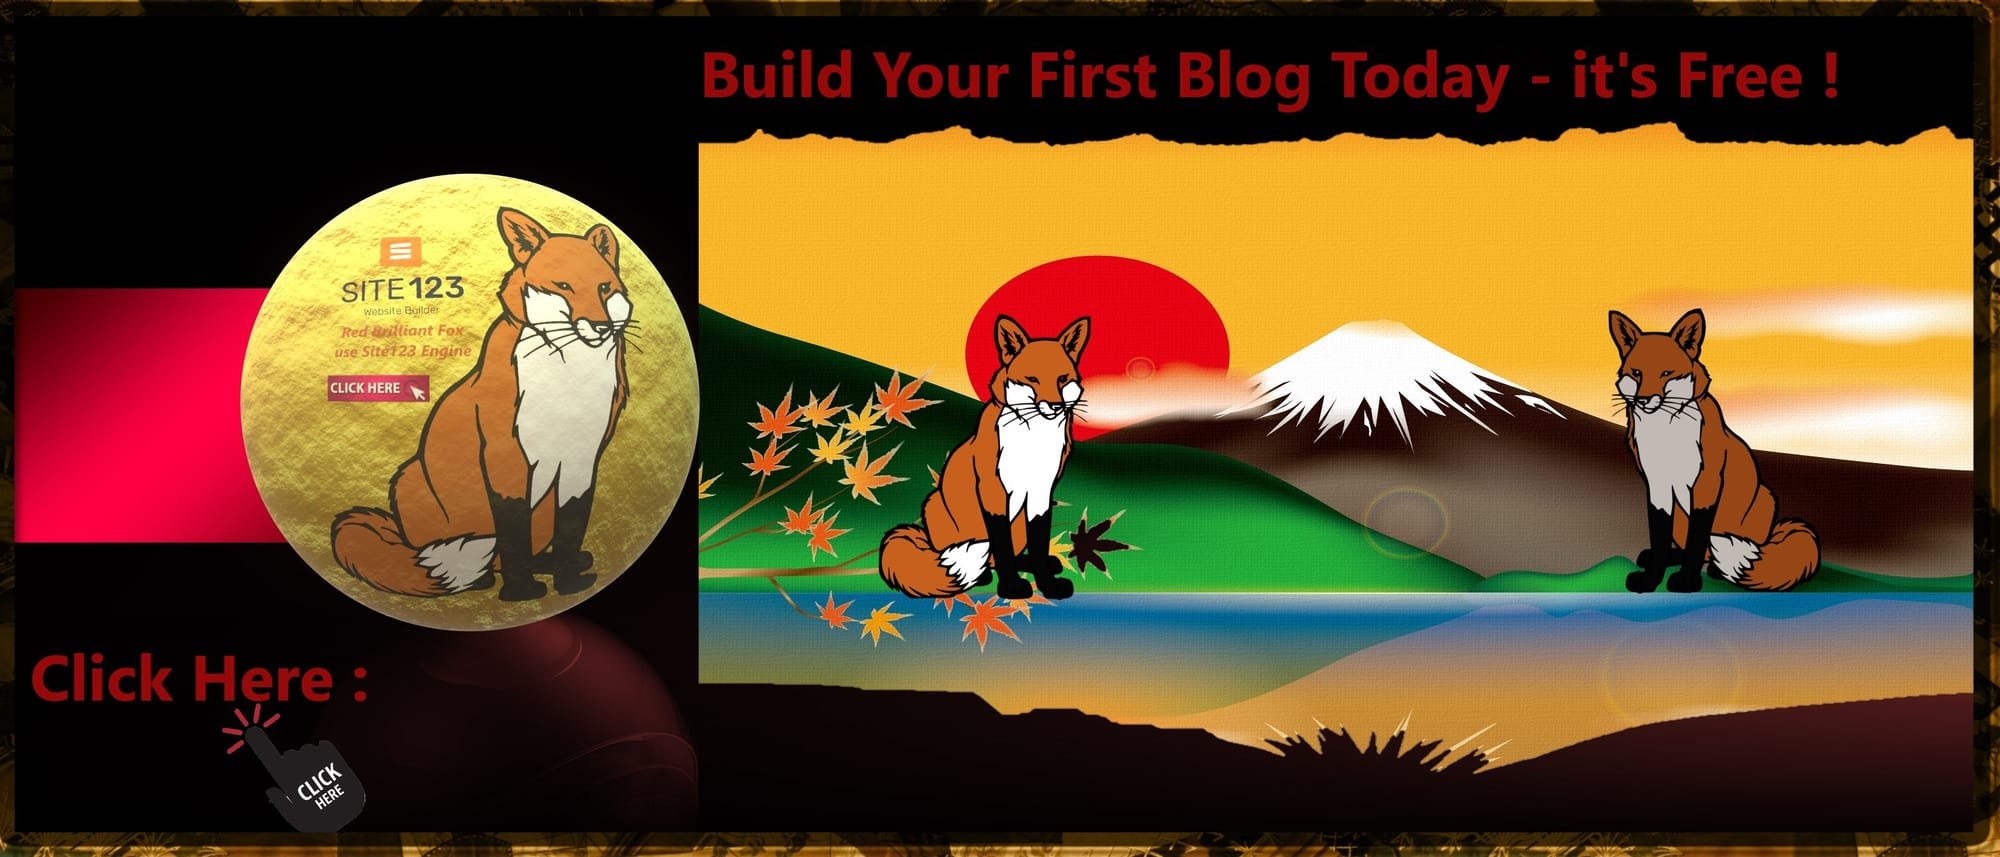 publish-your-first-blog-today